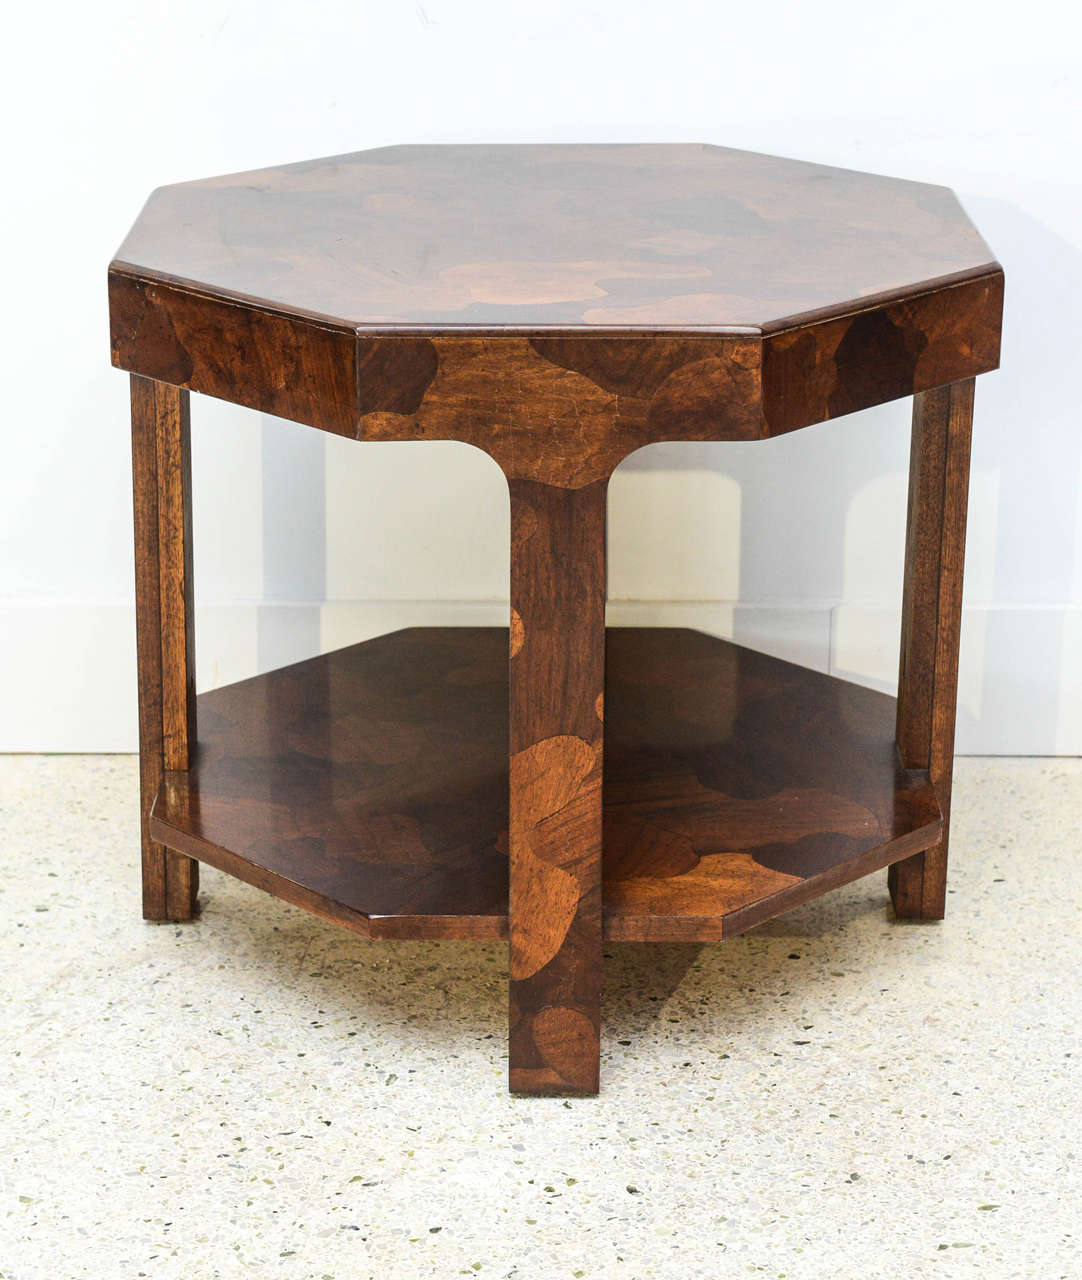 Mid-20th Century American Modern Inlaid Mixed Wood Octagonal Table, American of Martinsville